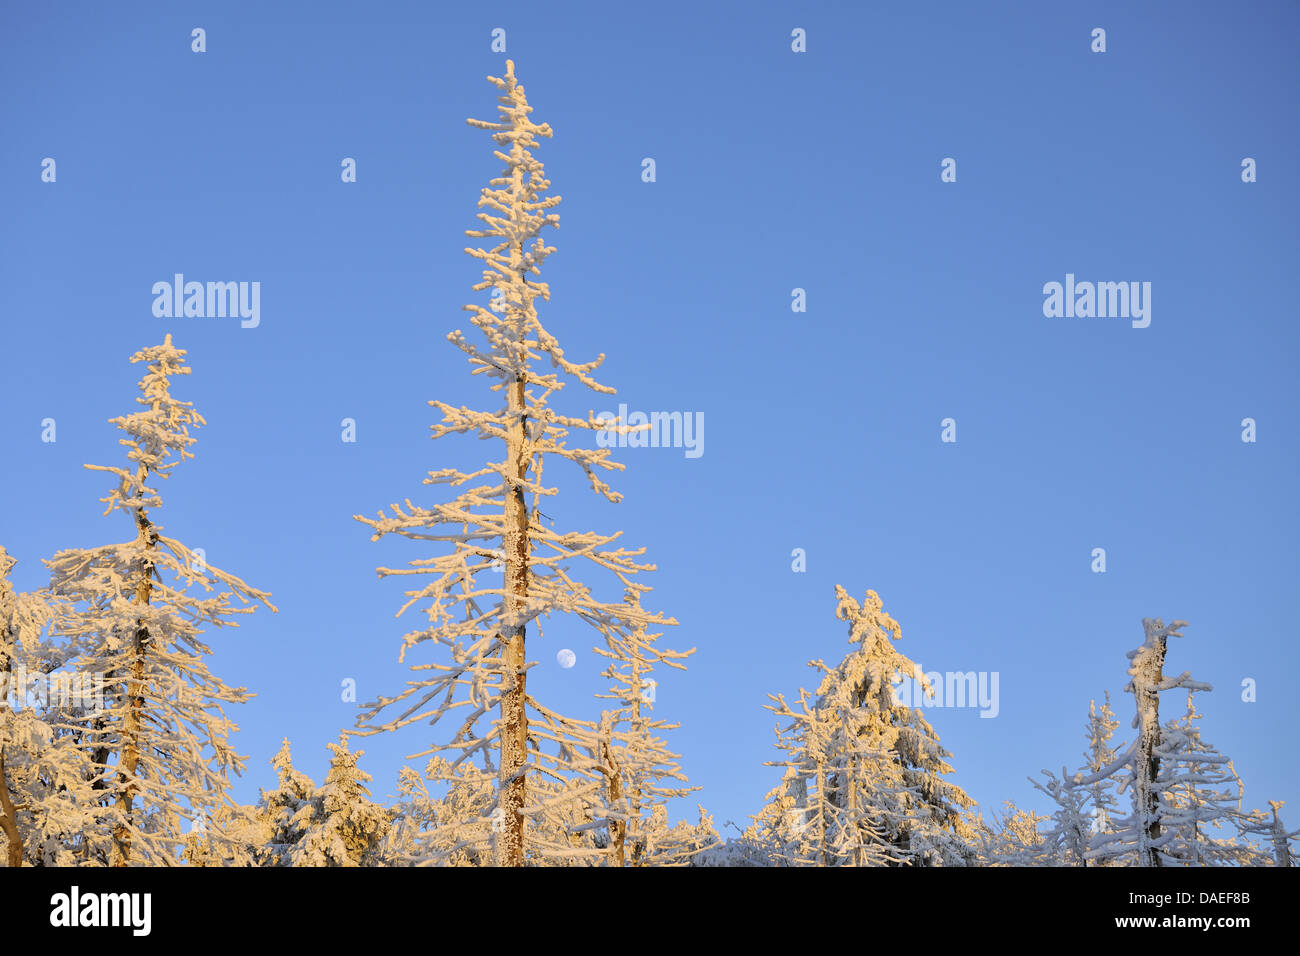 Norway spruce (Picea abies), Snow covered Trees with Moon, Grosser Inselsberg, Germany, Thueringen, Brotterode Stock Photo